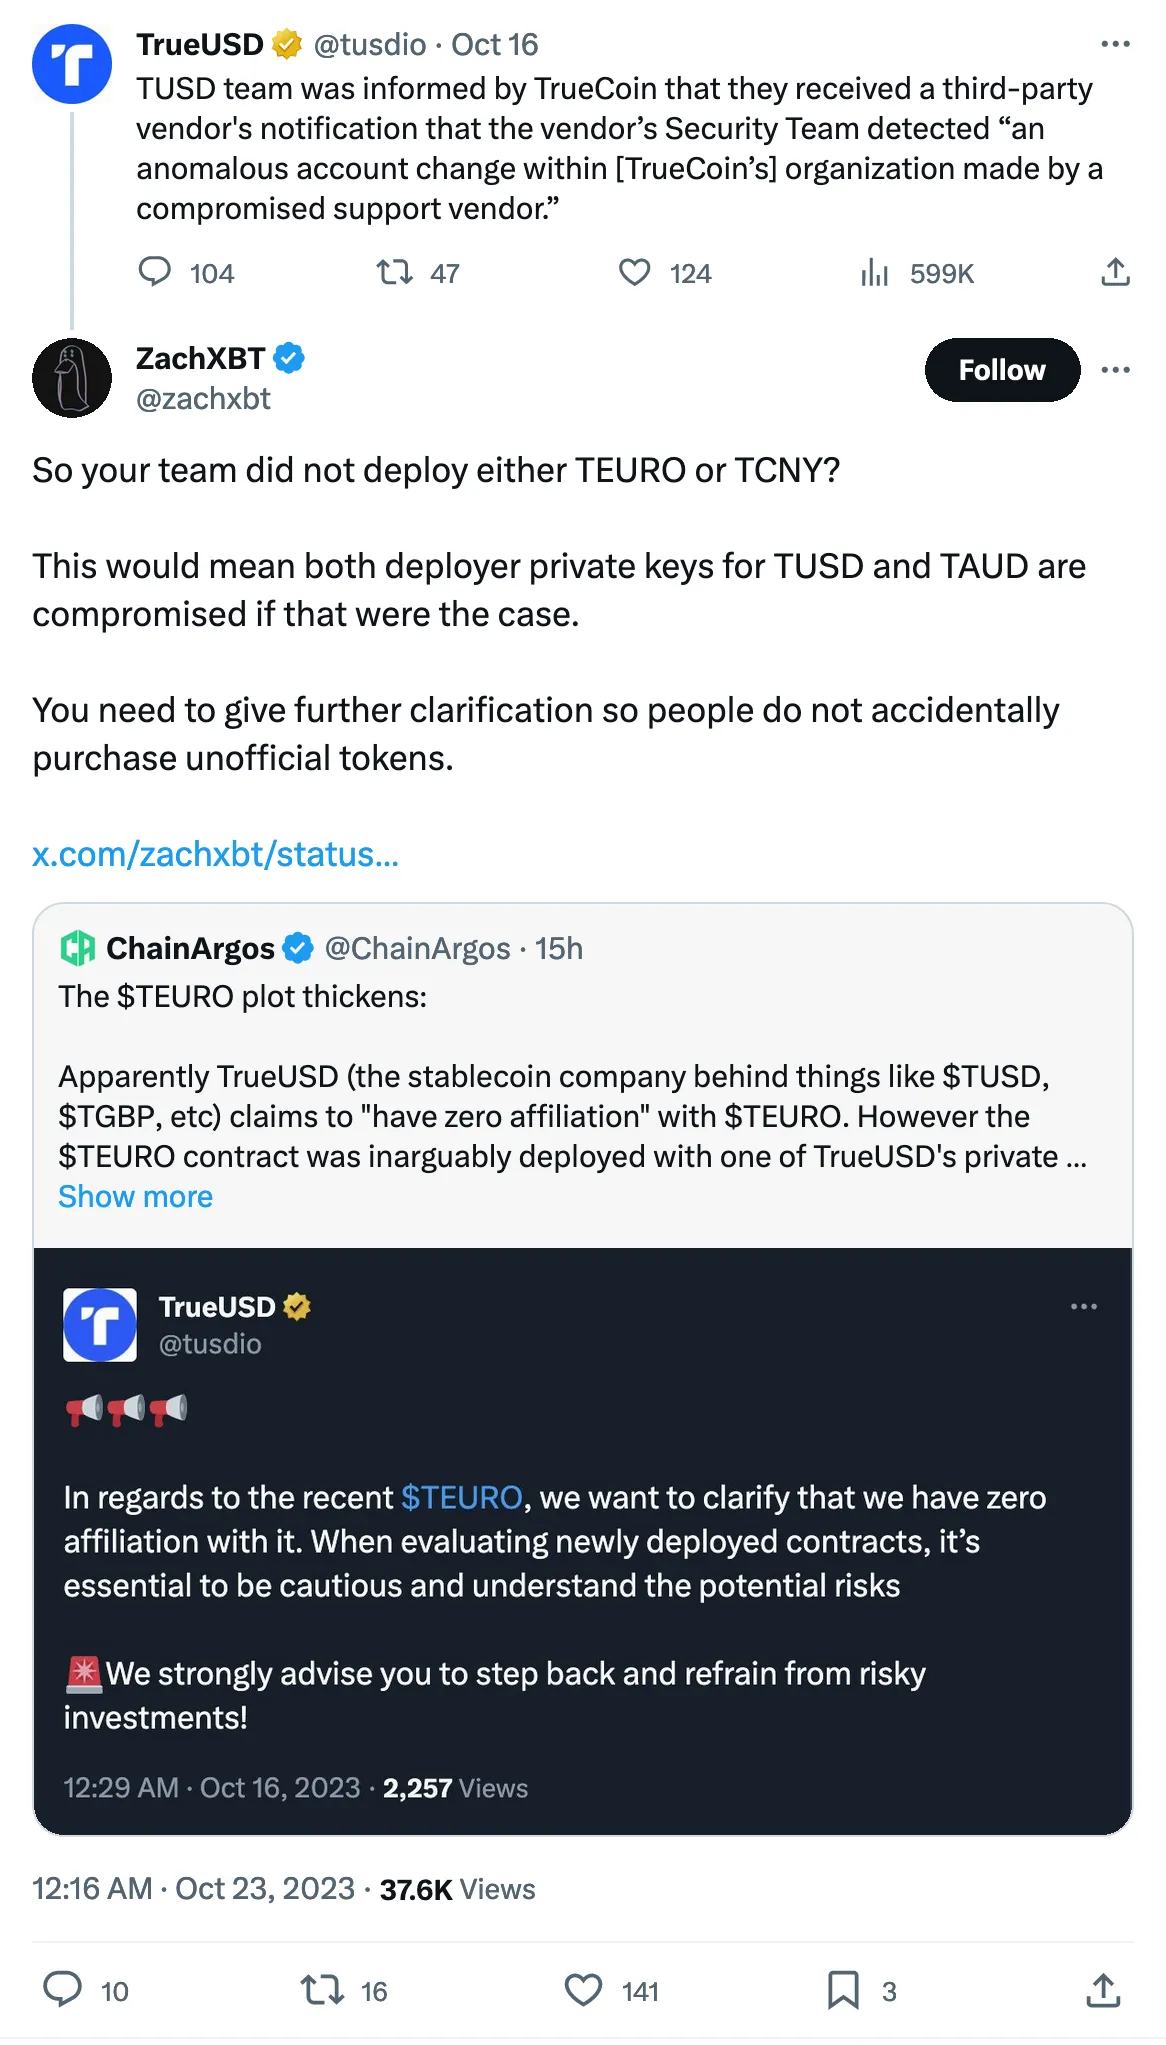 TUSD team was informed by TrueCoin that they received a third-party vendor's notification that the vendor’s Security Team detected “an anomalous account change within [TrueCoin’s] organization made by a compromised support vendor.” 
Tweeted at Oct 16

So your team did not deploy either TEURO or TCNY? 

This would mean both deployer private keys for TUSD and TAUD are compromised if that were the case. 

You need to give further clarification so people do not accidentally purchase unofficial tokens. 

https://x.com/zachxbt/status/1716305364801429551… 
Tweeted at 15h